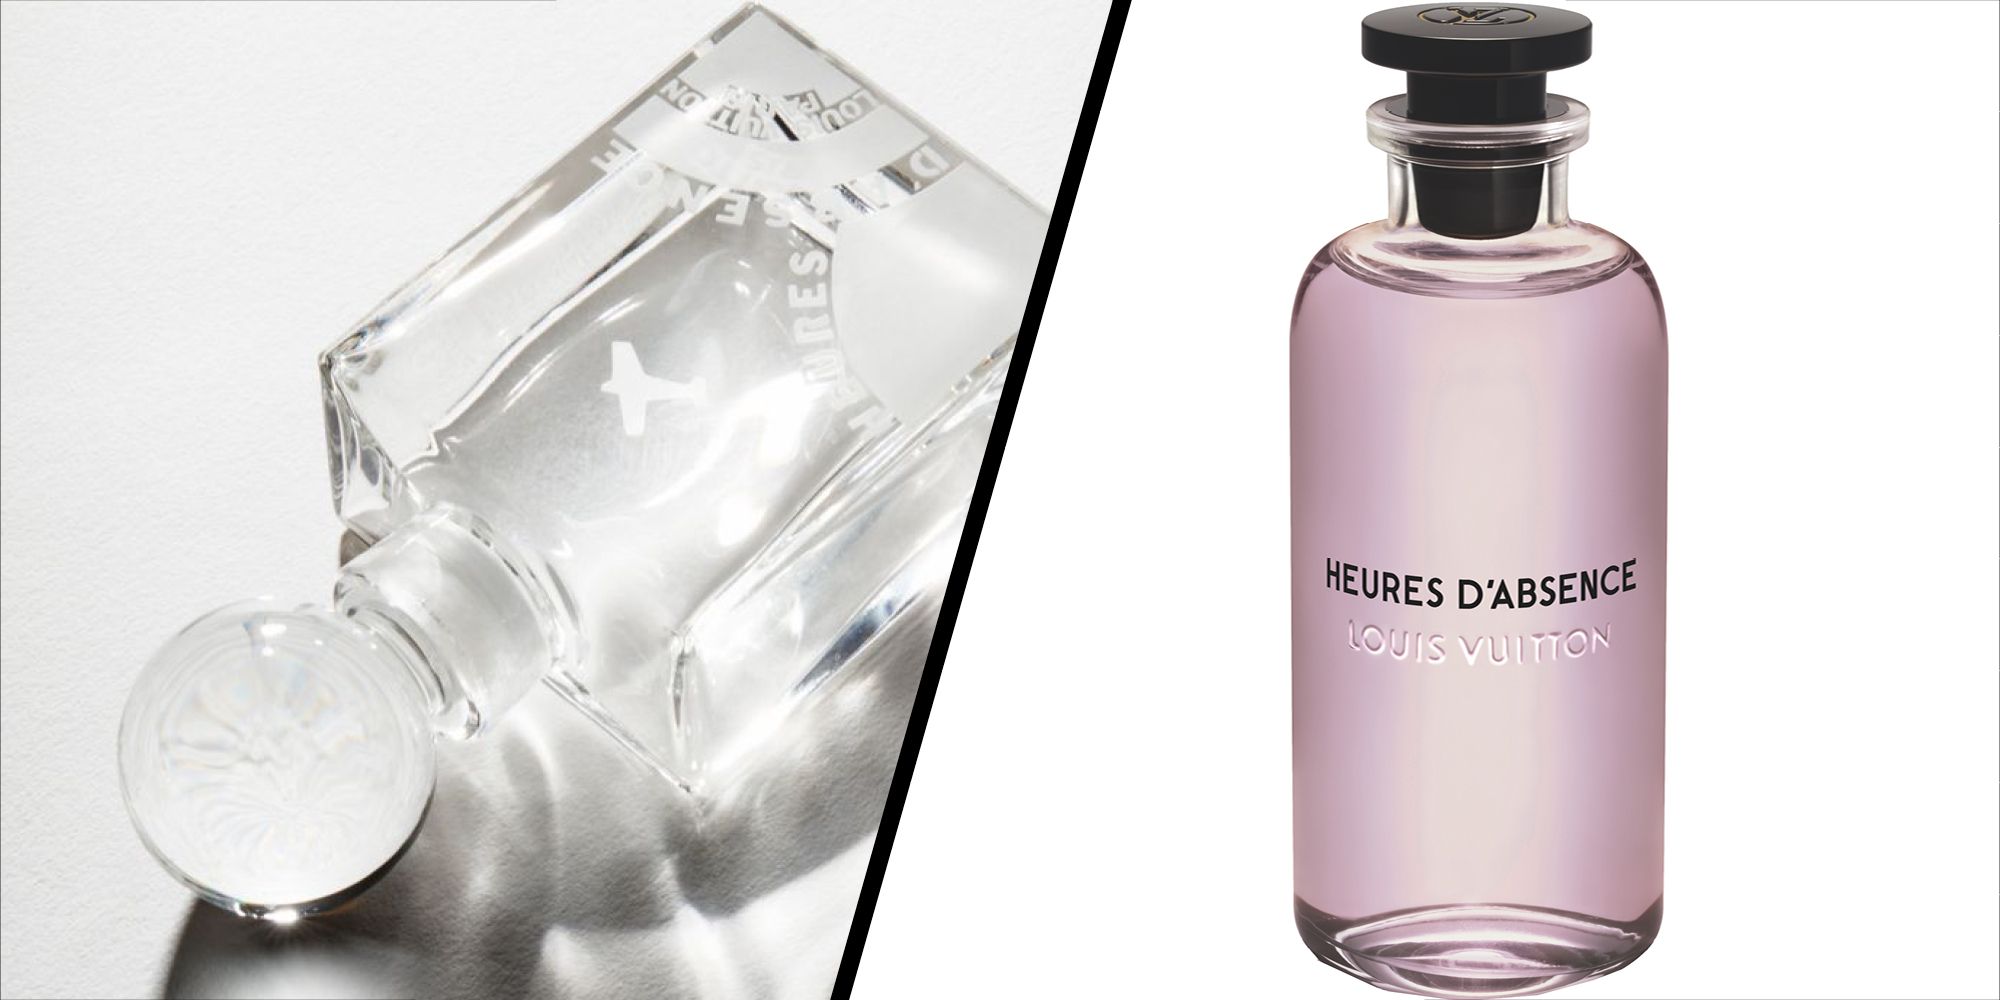 Louis Vuitton relaunches fragrance Heures d'Absence